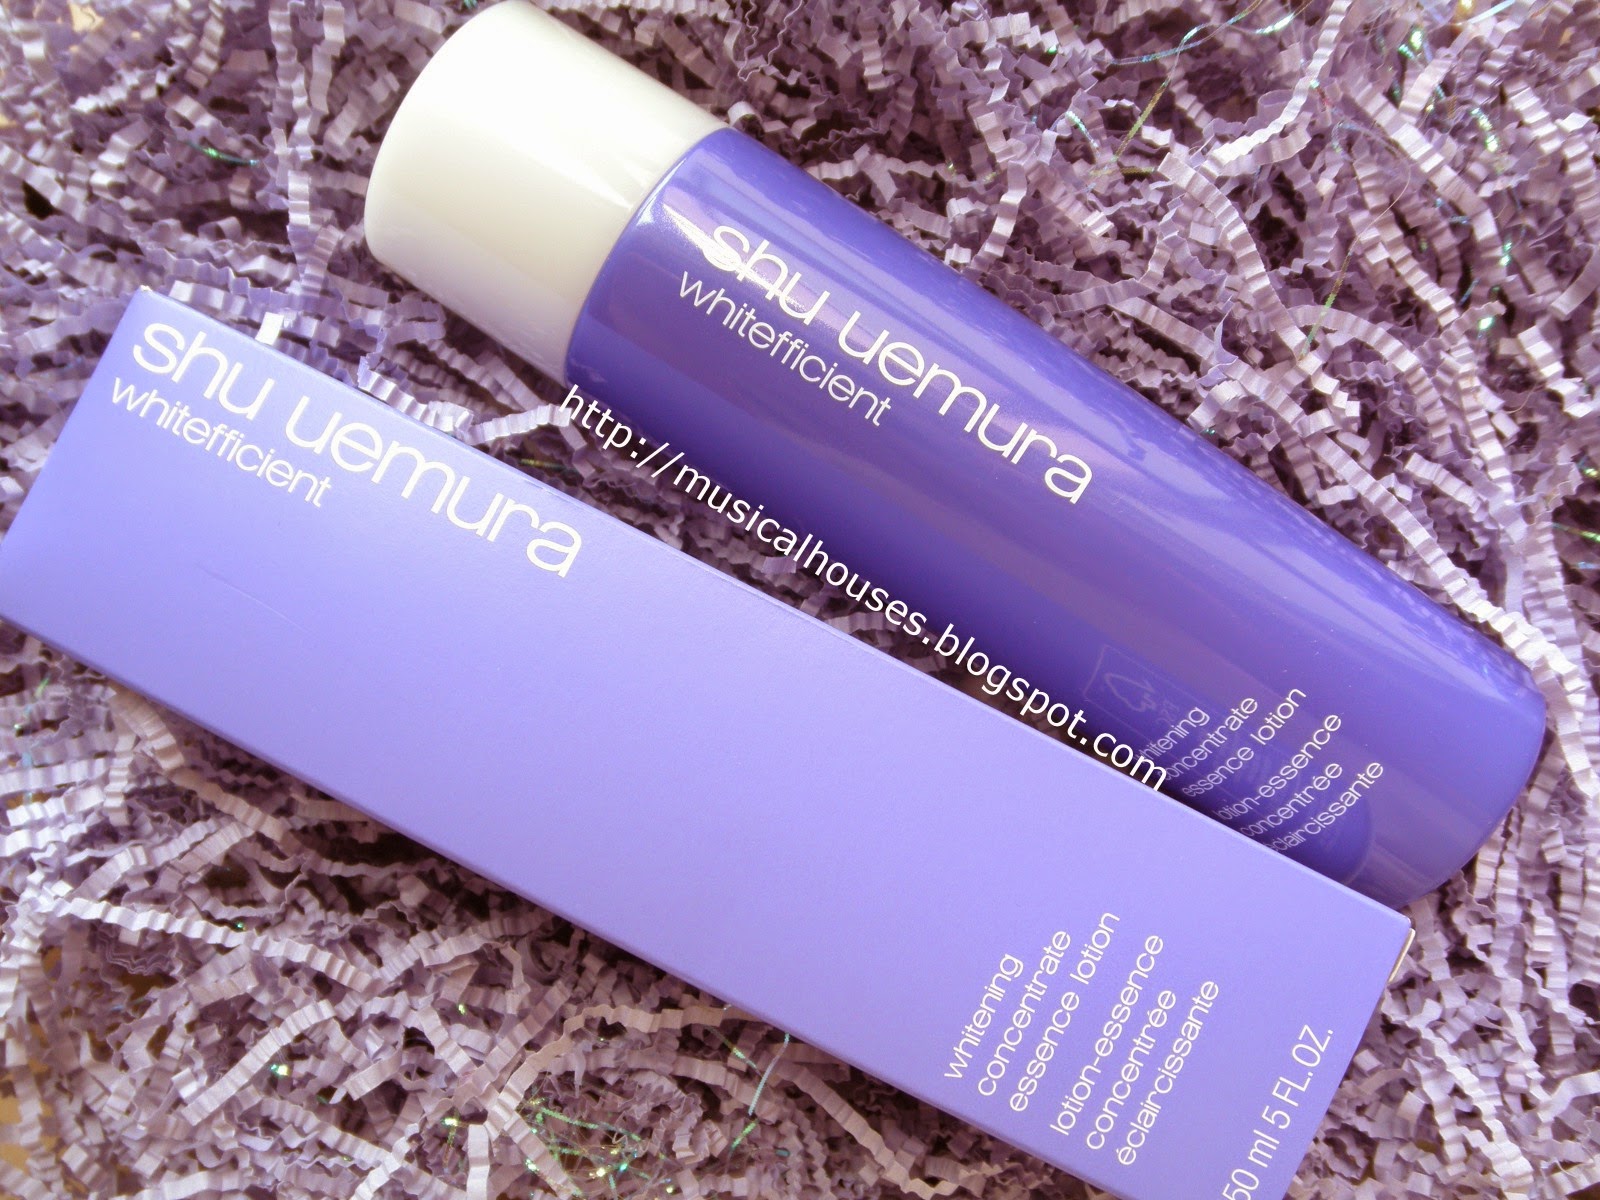 Shu Uemura Whitefficient Whitening Concentrate Essence Lotion Review and  Ingredients Analysis - of Faces and Fingers